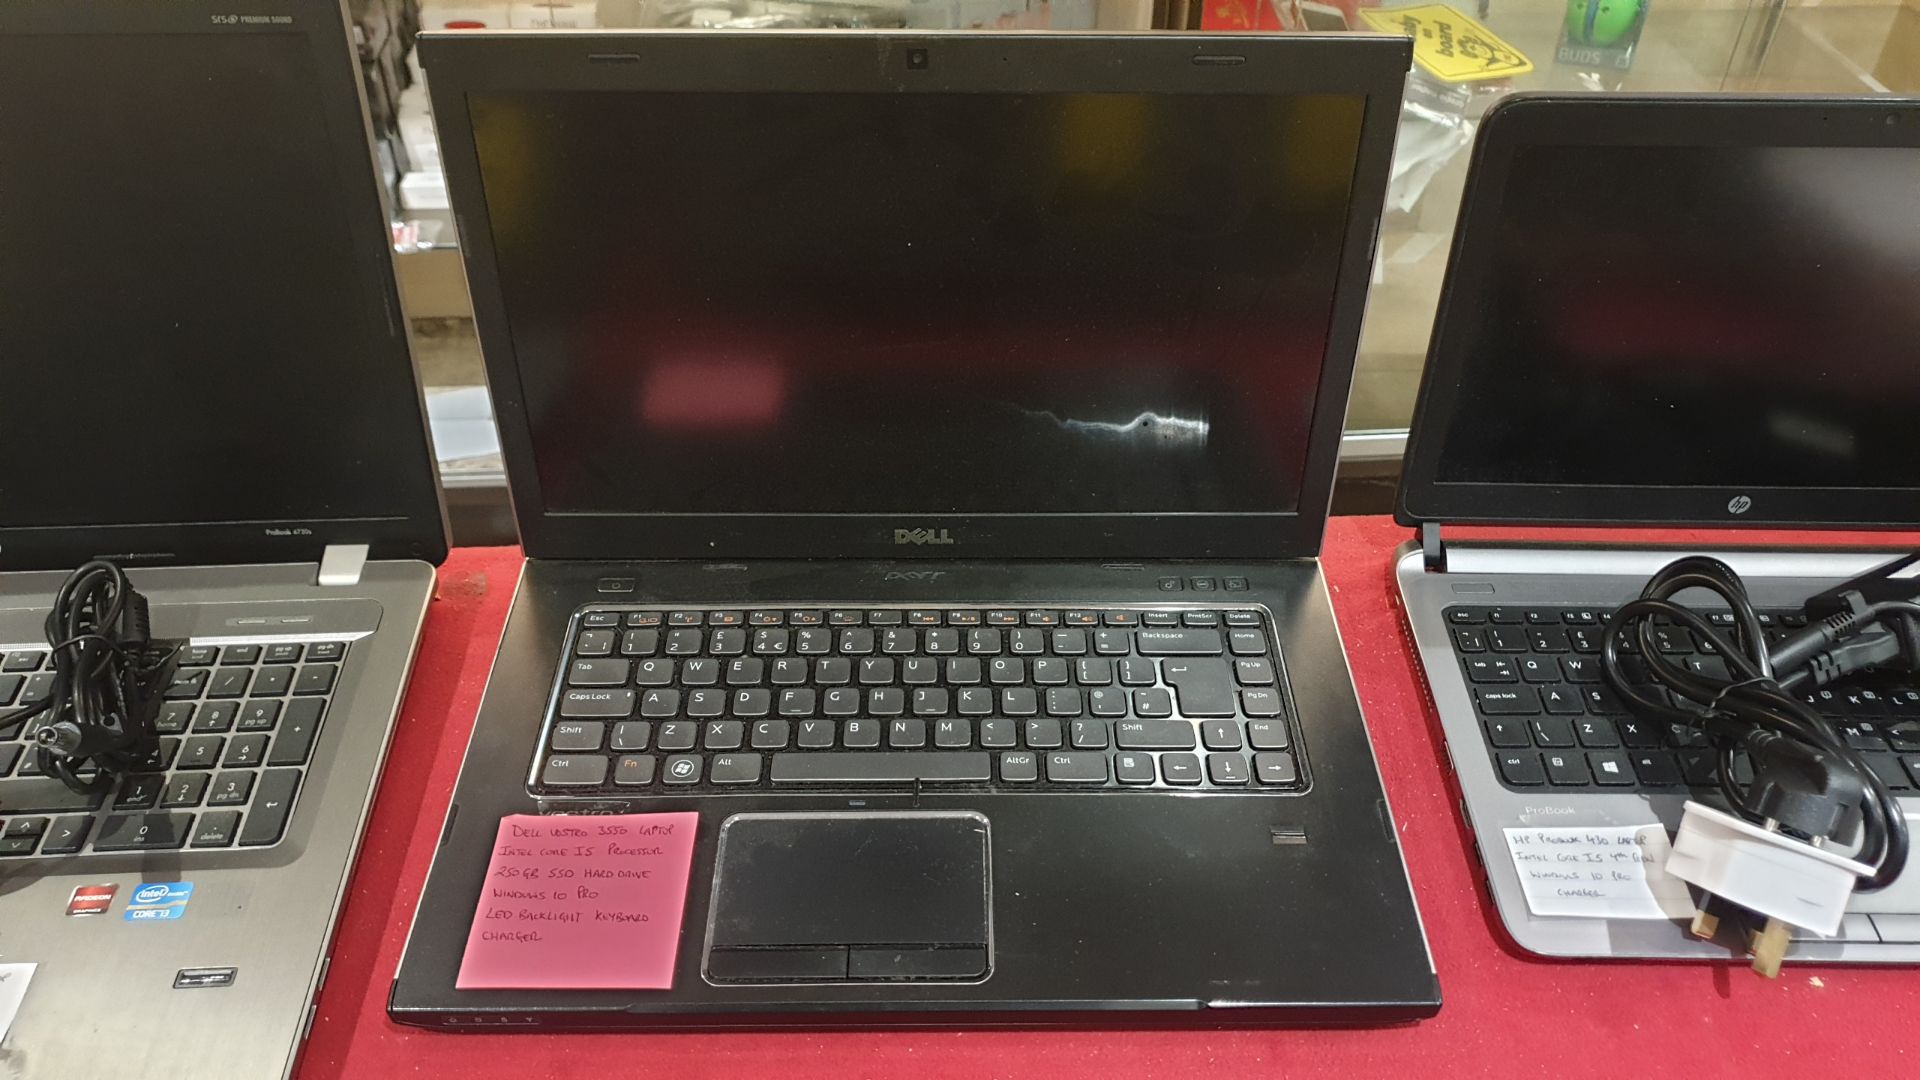 DELL VOSTRO 3550 LAPTOP INTEL CORE IS PROCESSOR, 250 GB SSD HARD DRIVE, LED BACKLIT KEYBOARD WITH